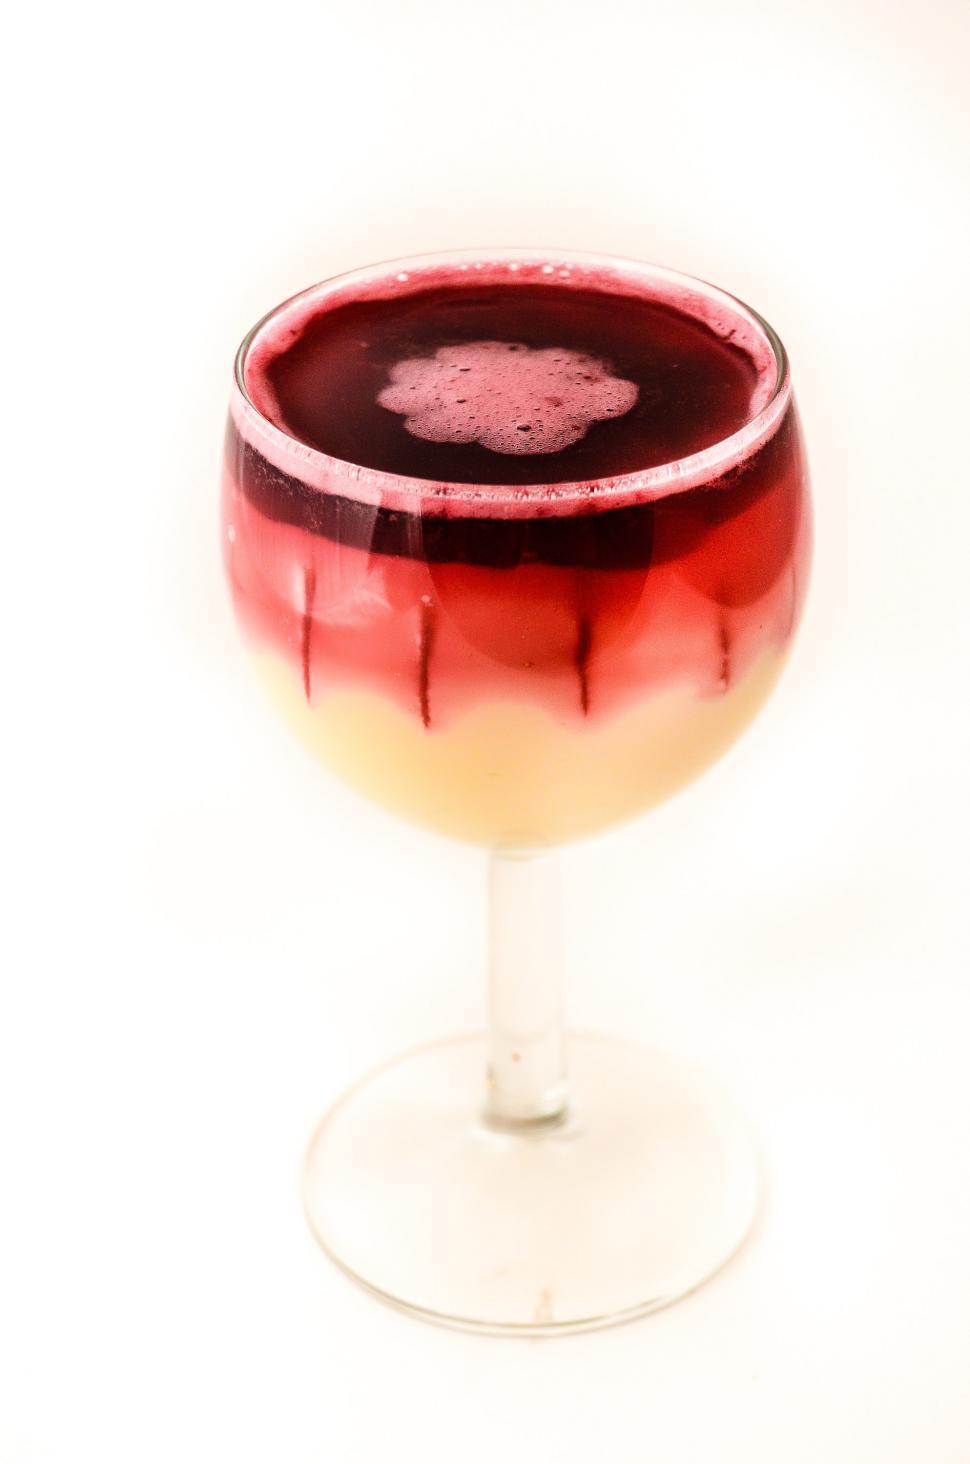 Free Image of Red and White Drink in Wine Glass 